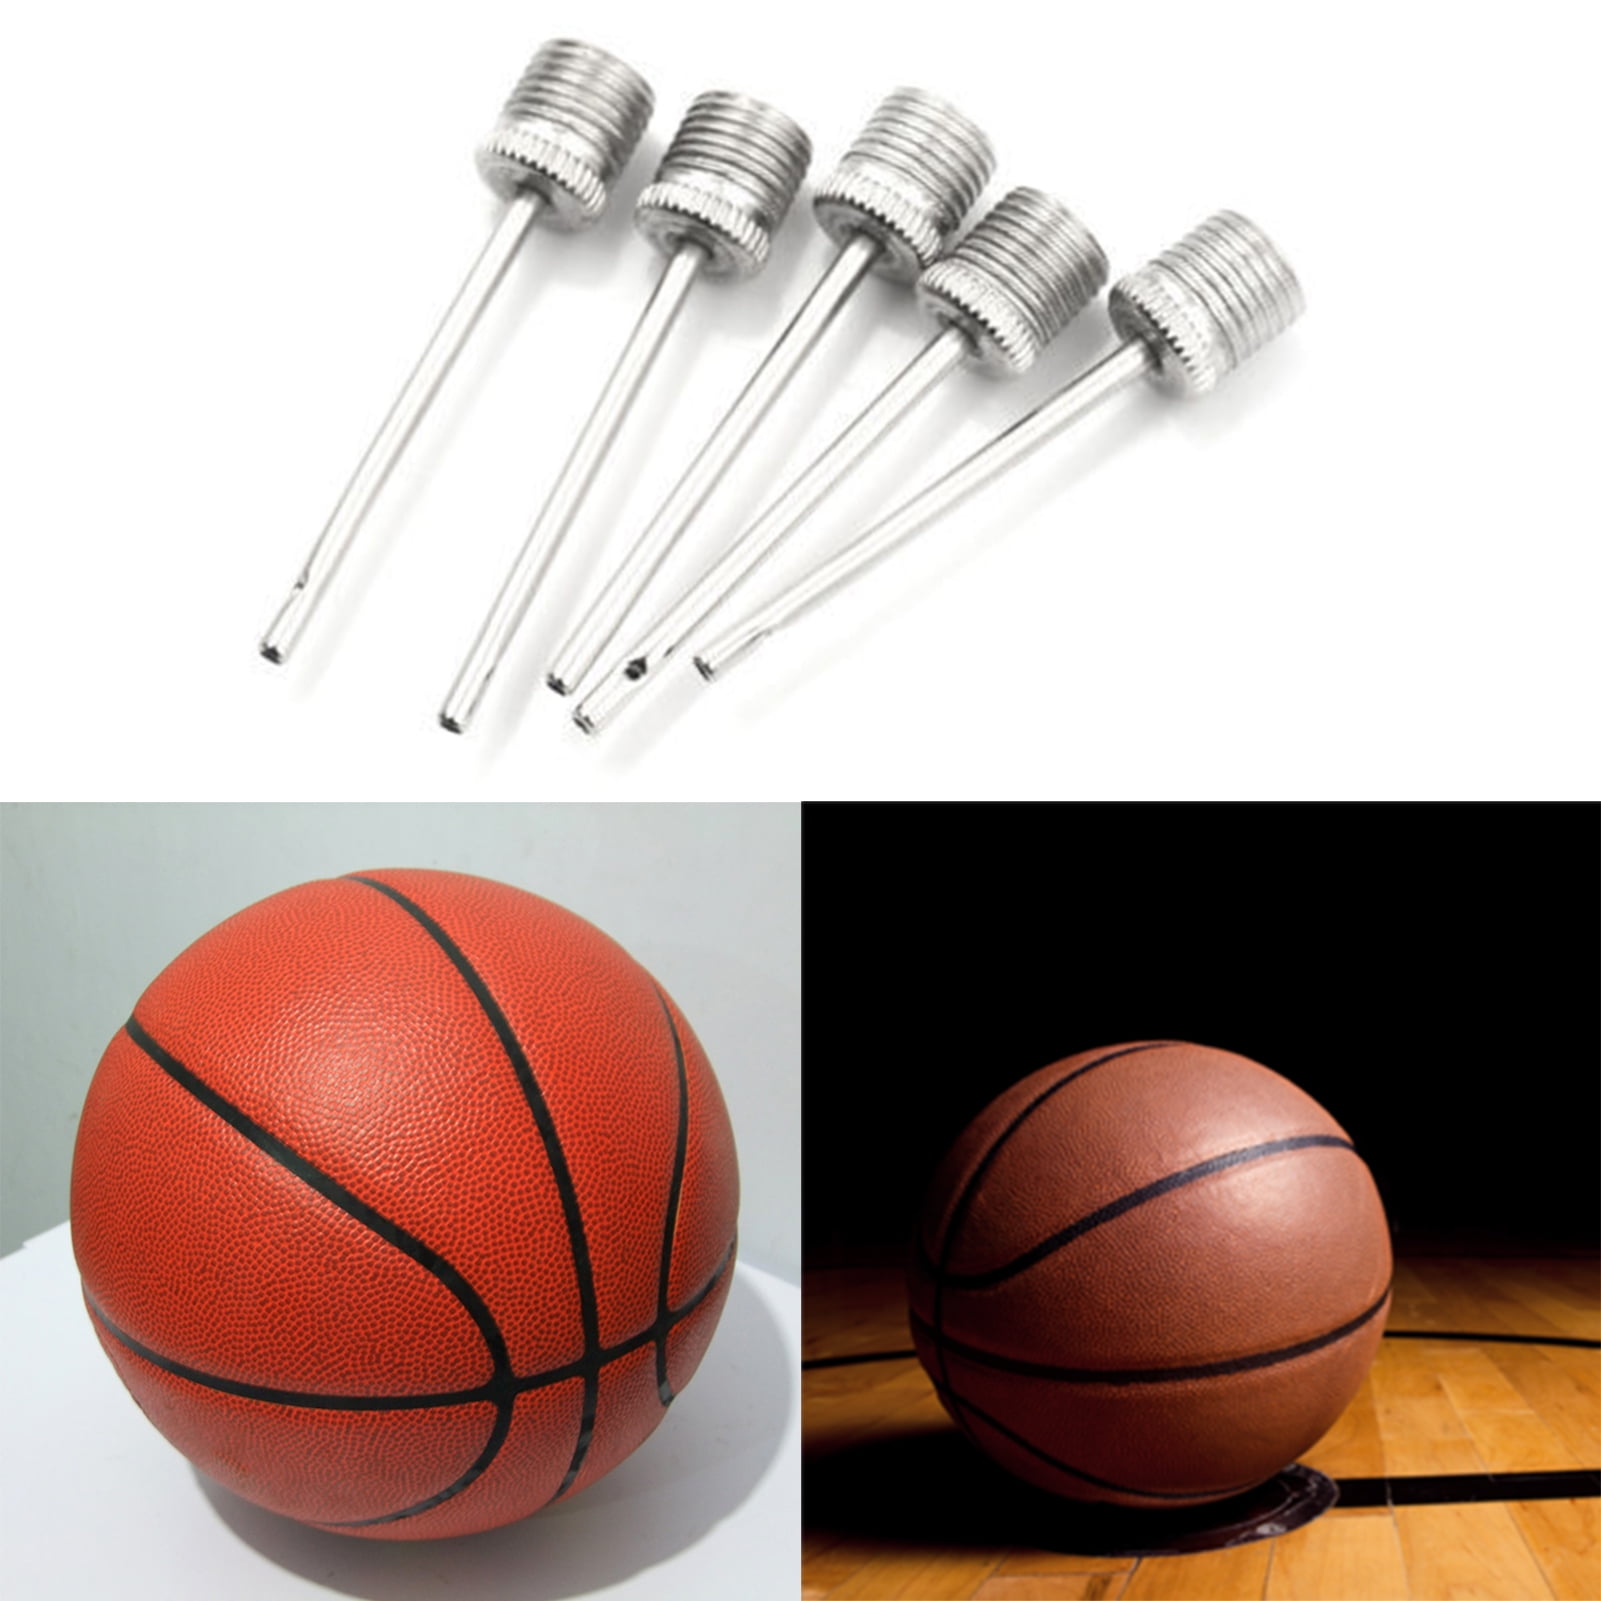 Basketball Needle Connector Inflation Pin Nozzle Air Pump Needle for Soccer Volleyball Ball Pumping Fancyes 30x Ball Pump Needles for Sports Ball 